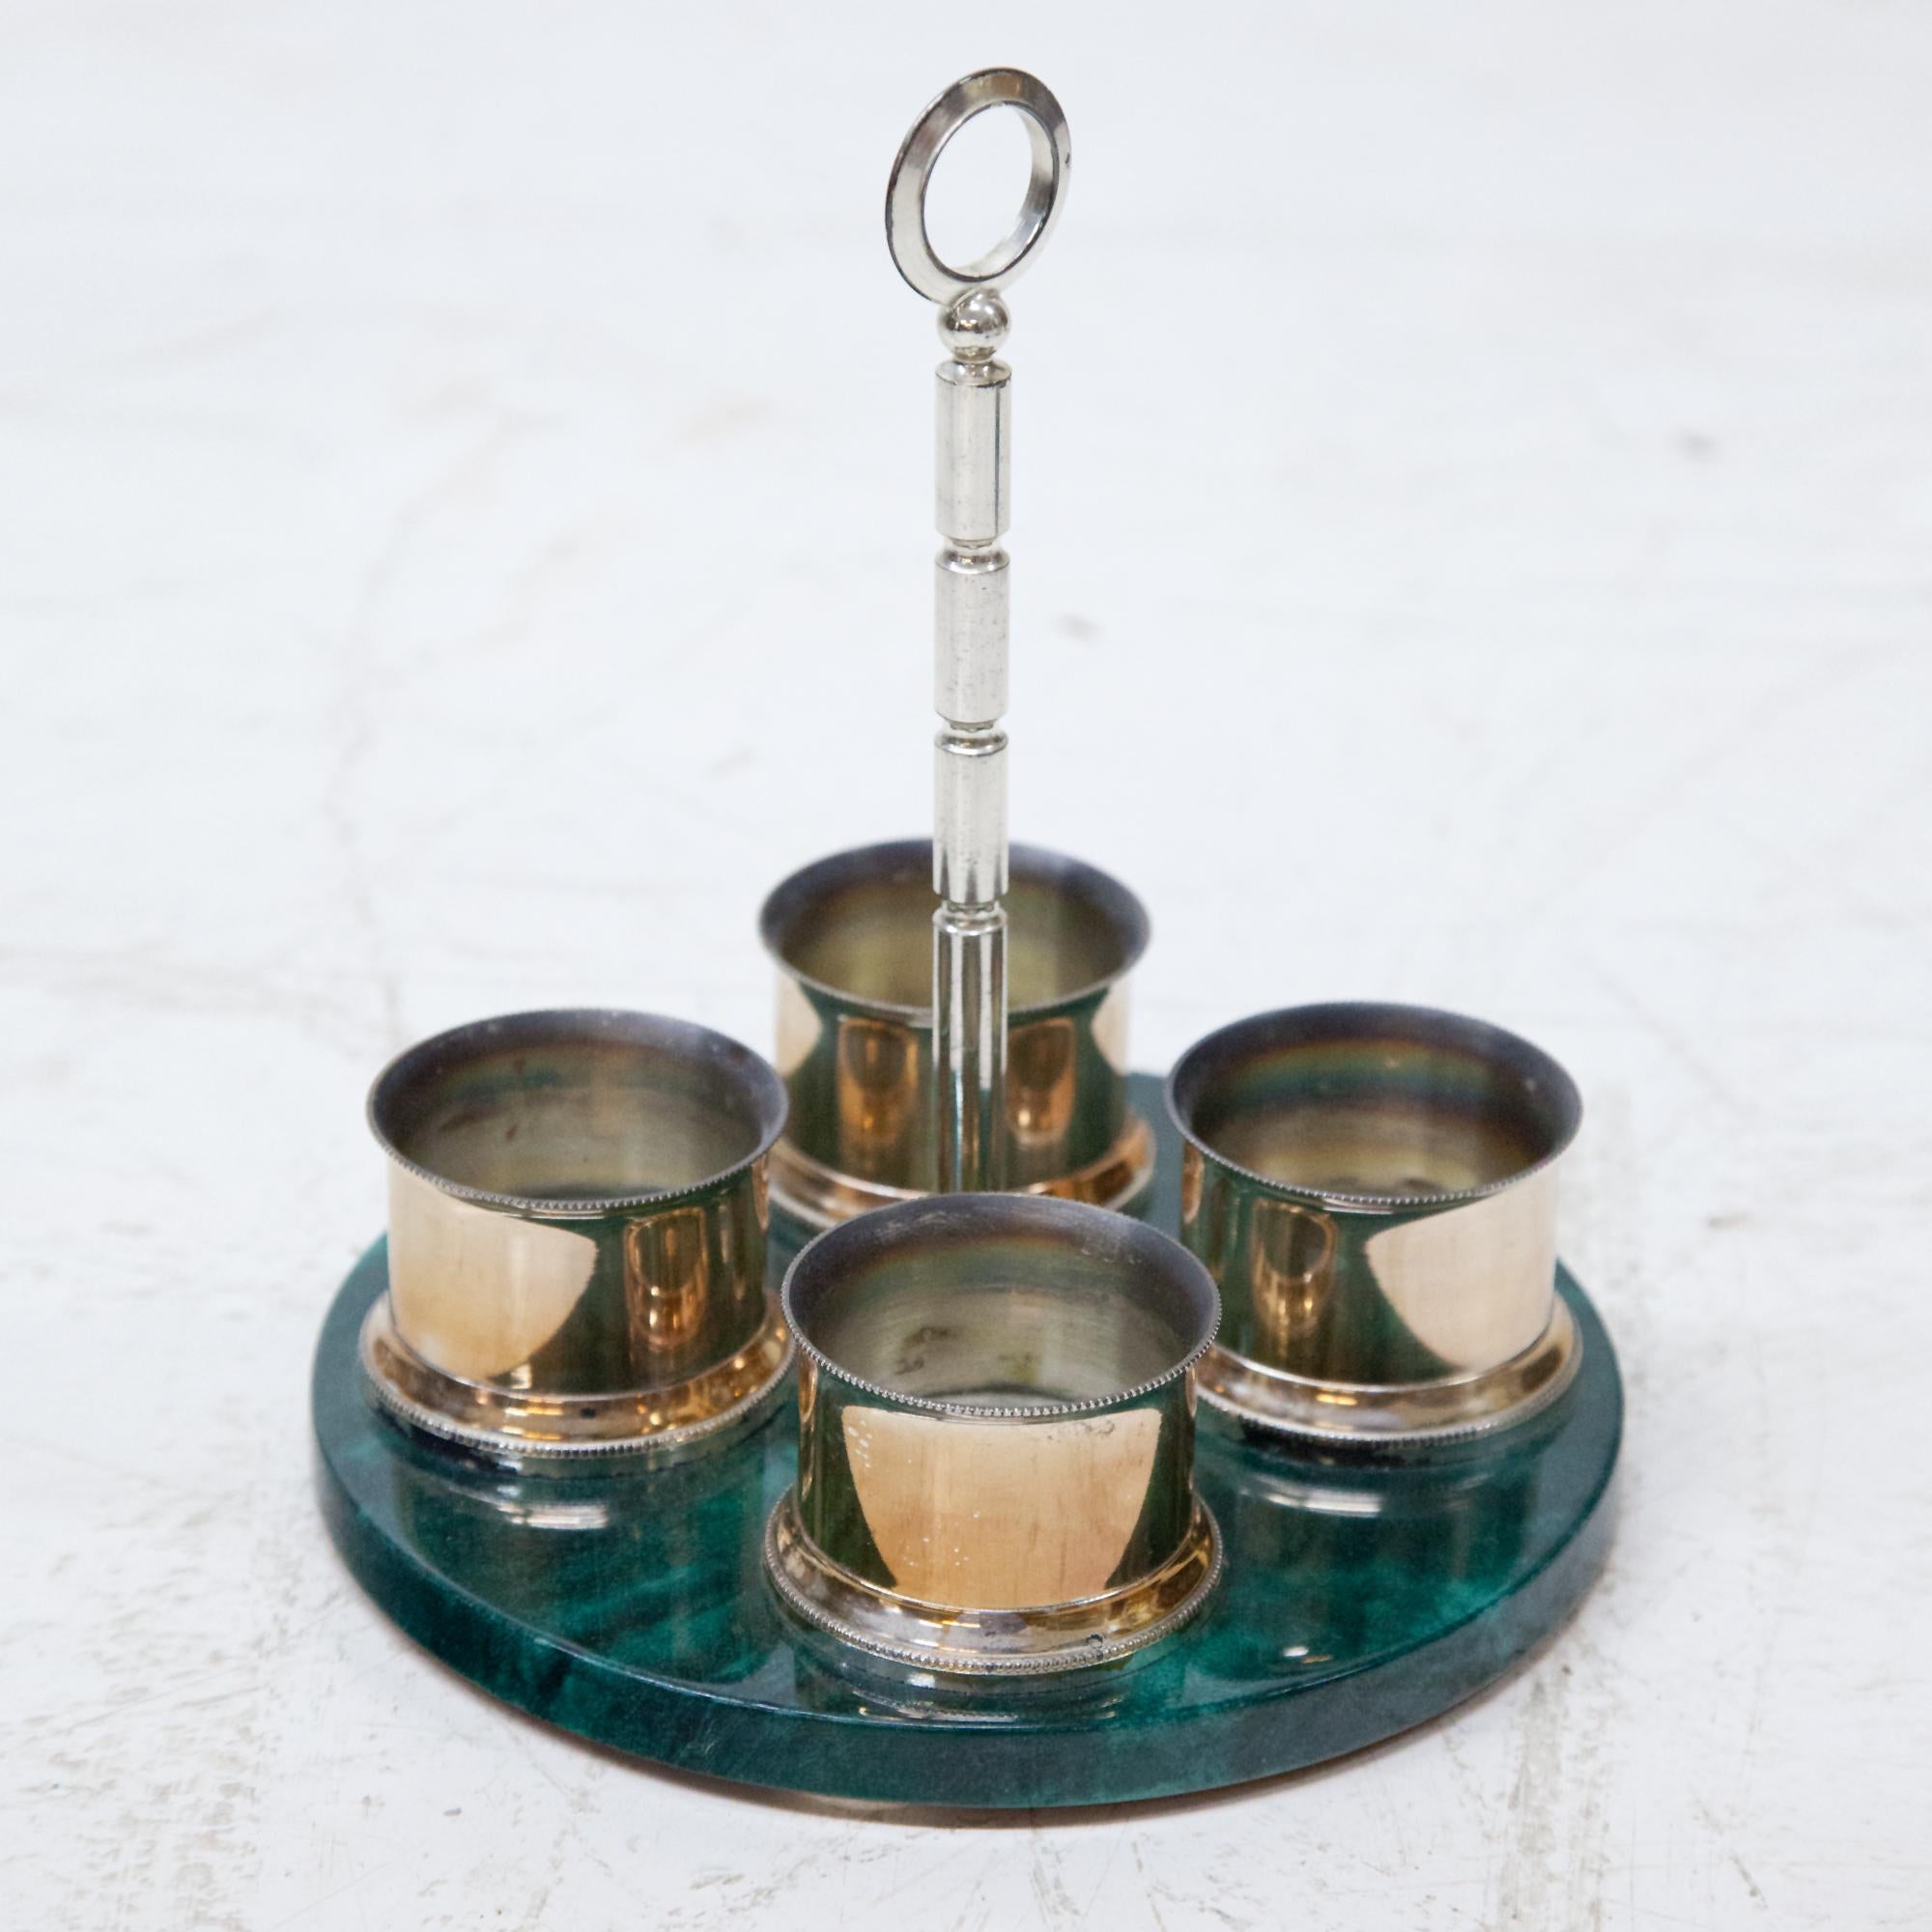 Menagerie covered with green colored goatskin and clear varnish. Space for four bottles. Brass plated. Base label 